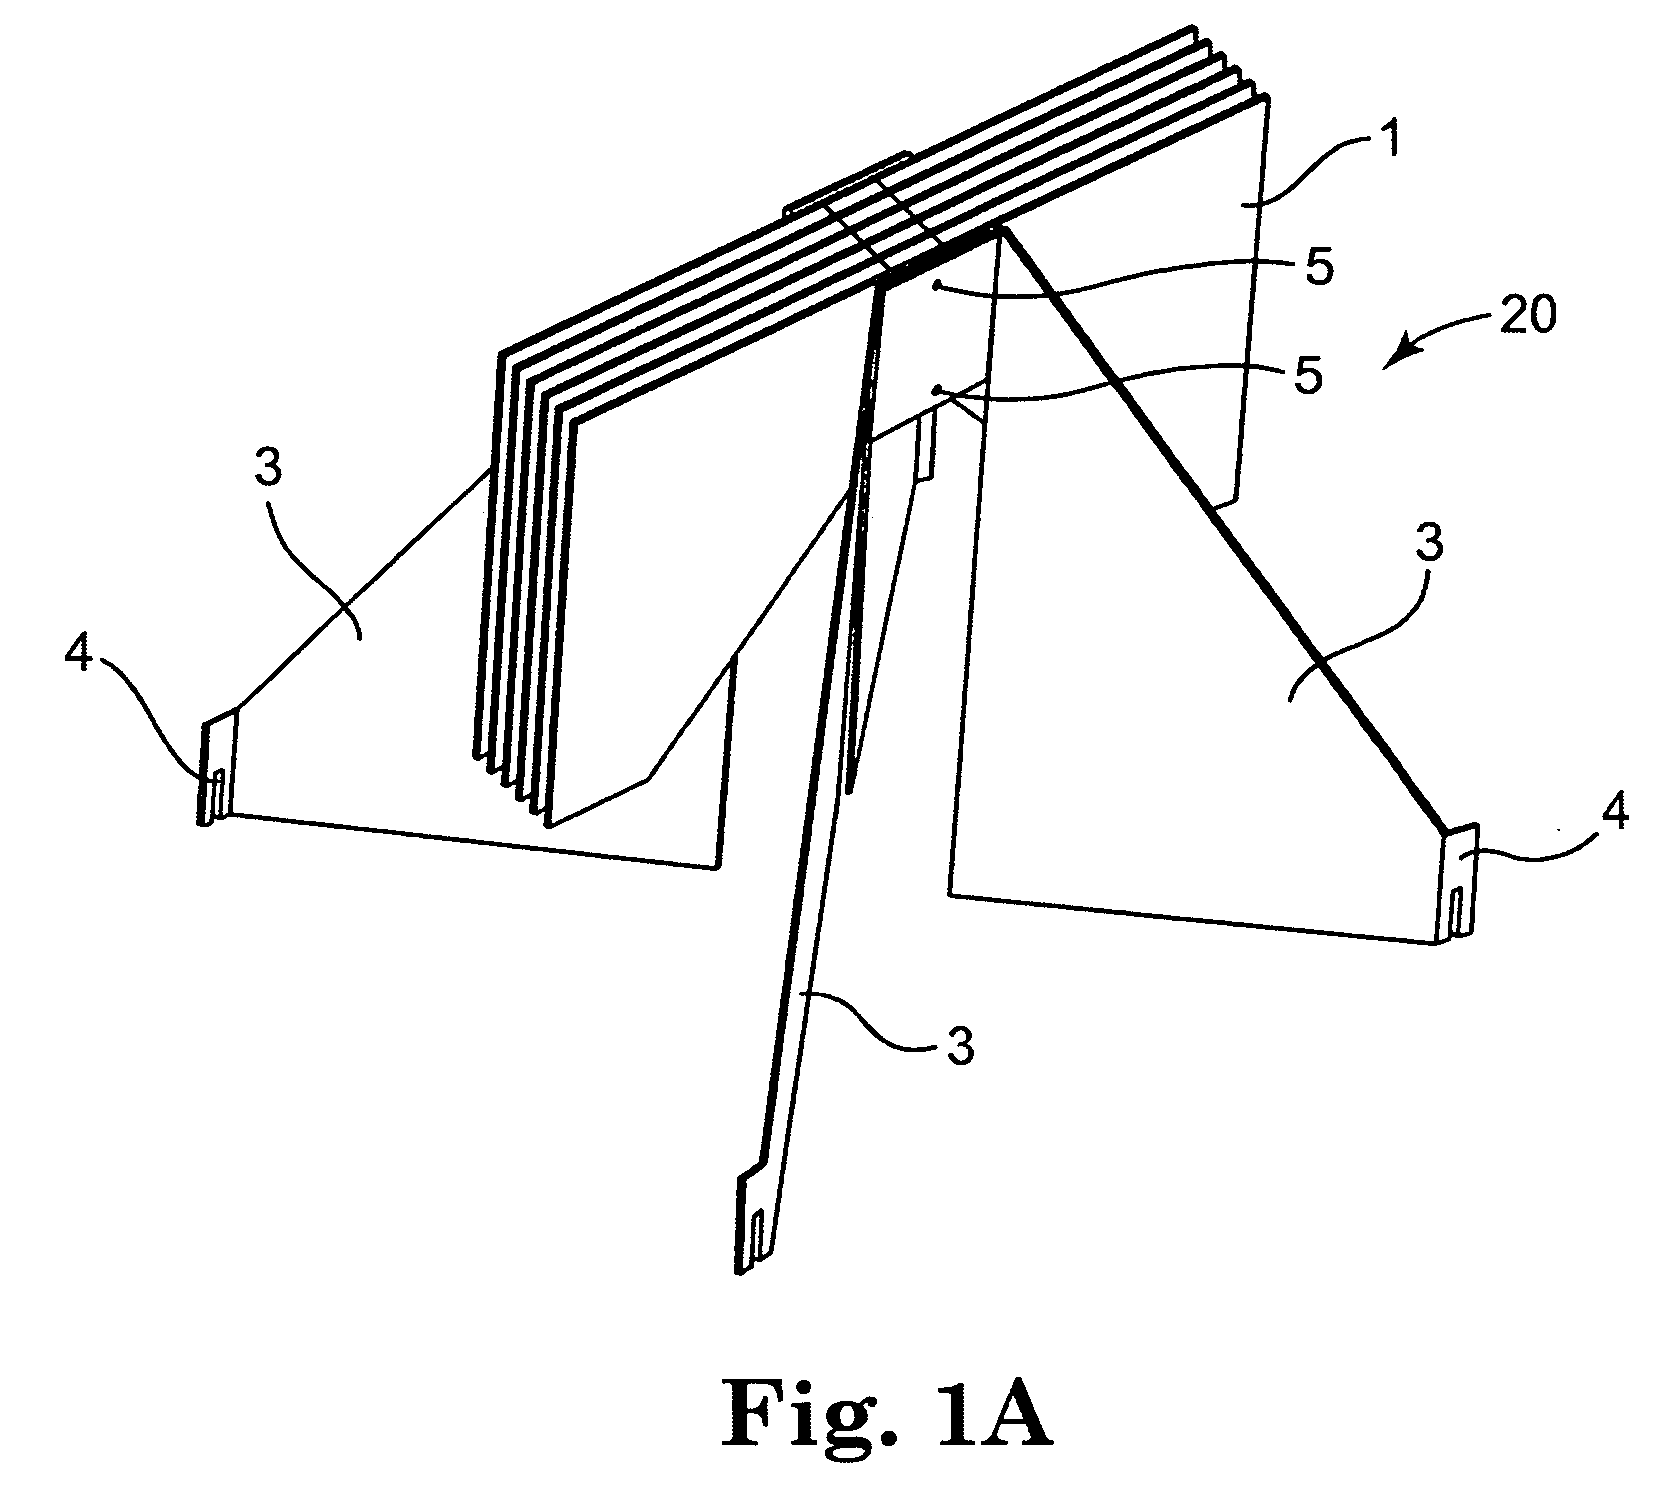 Heatsink for concentrating or focusing optical/electrical energy conversion systems